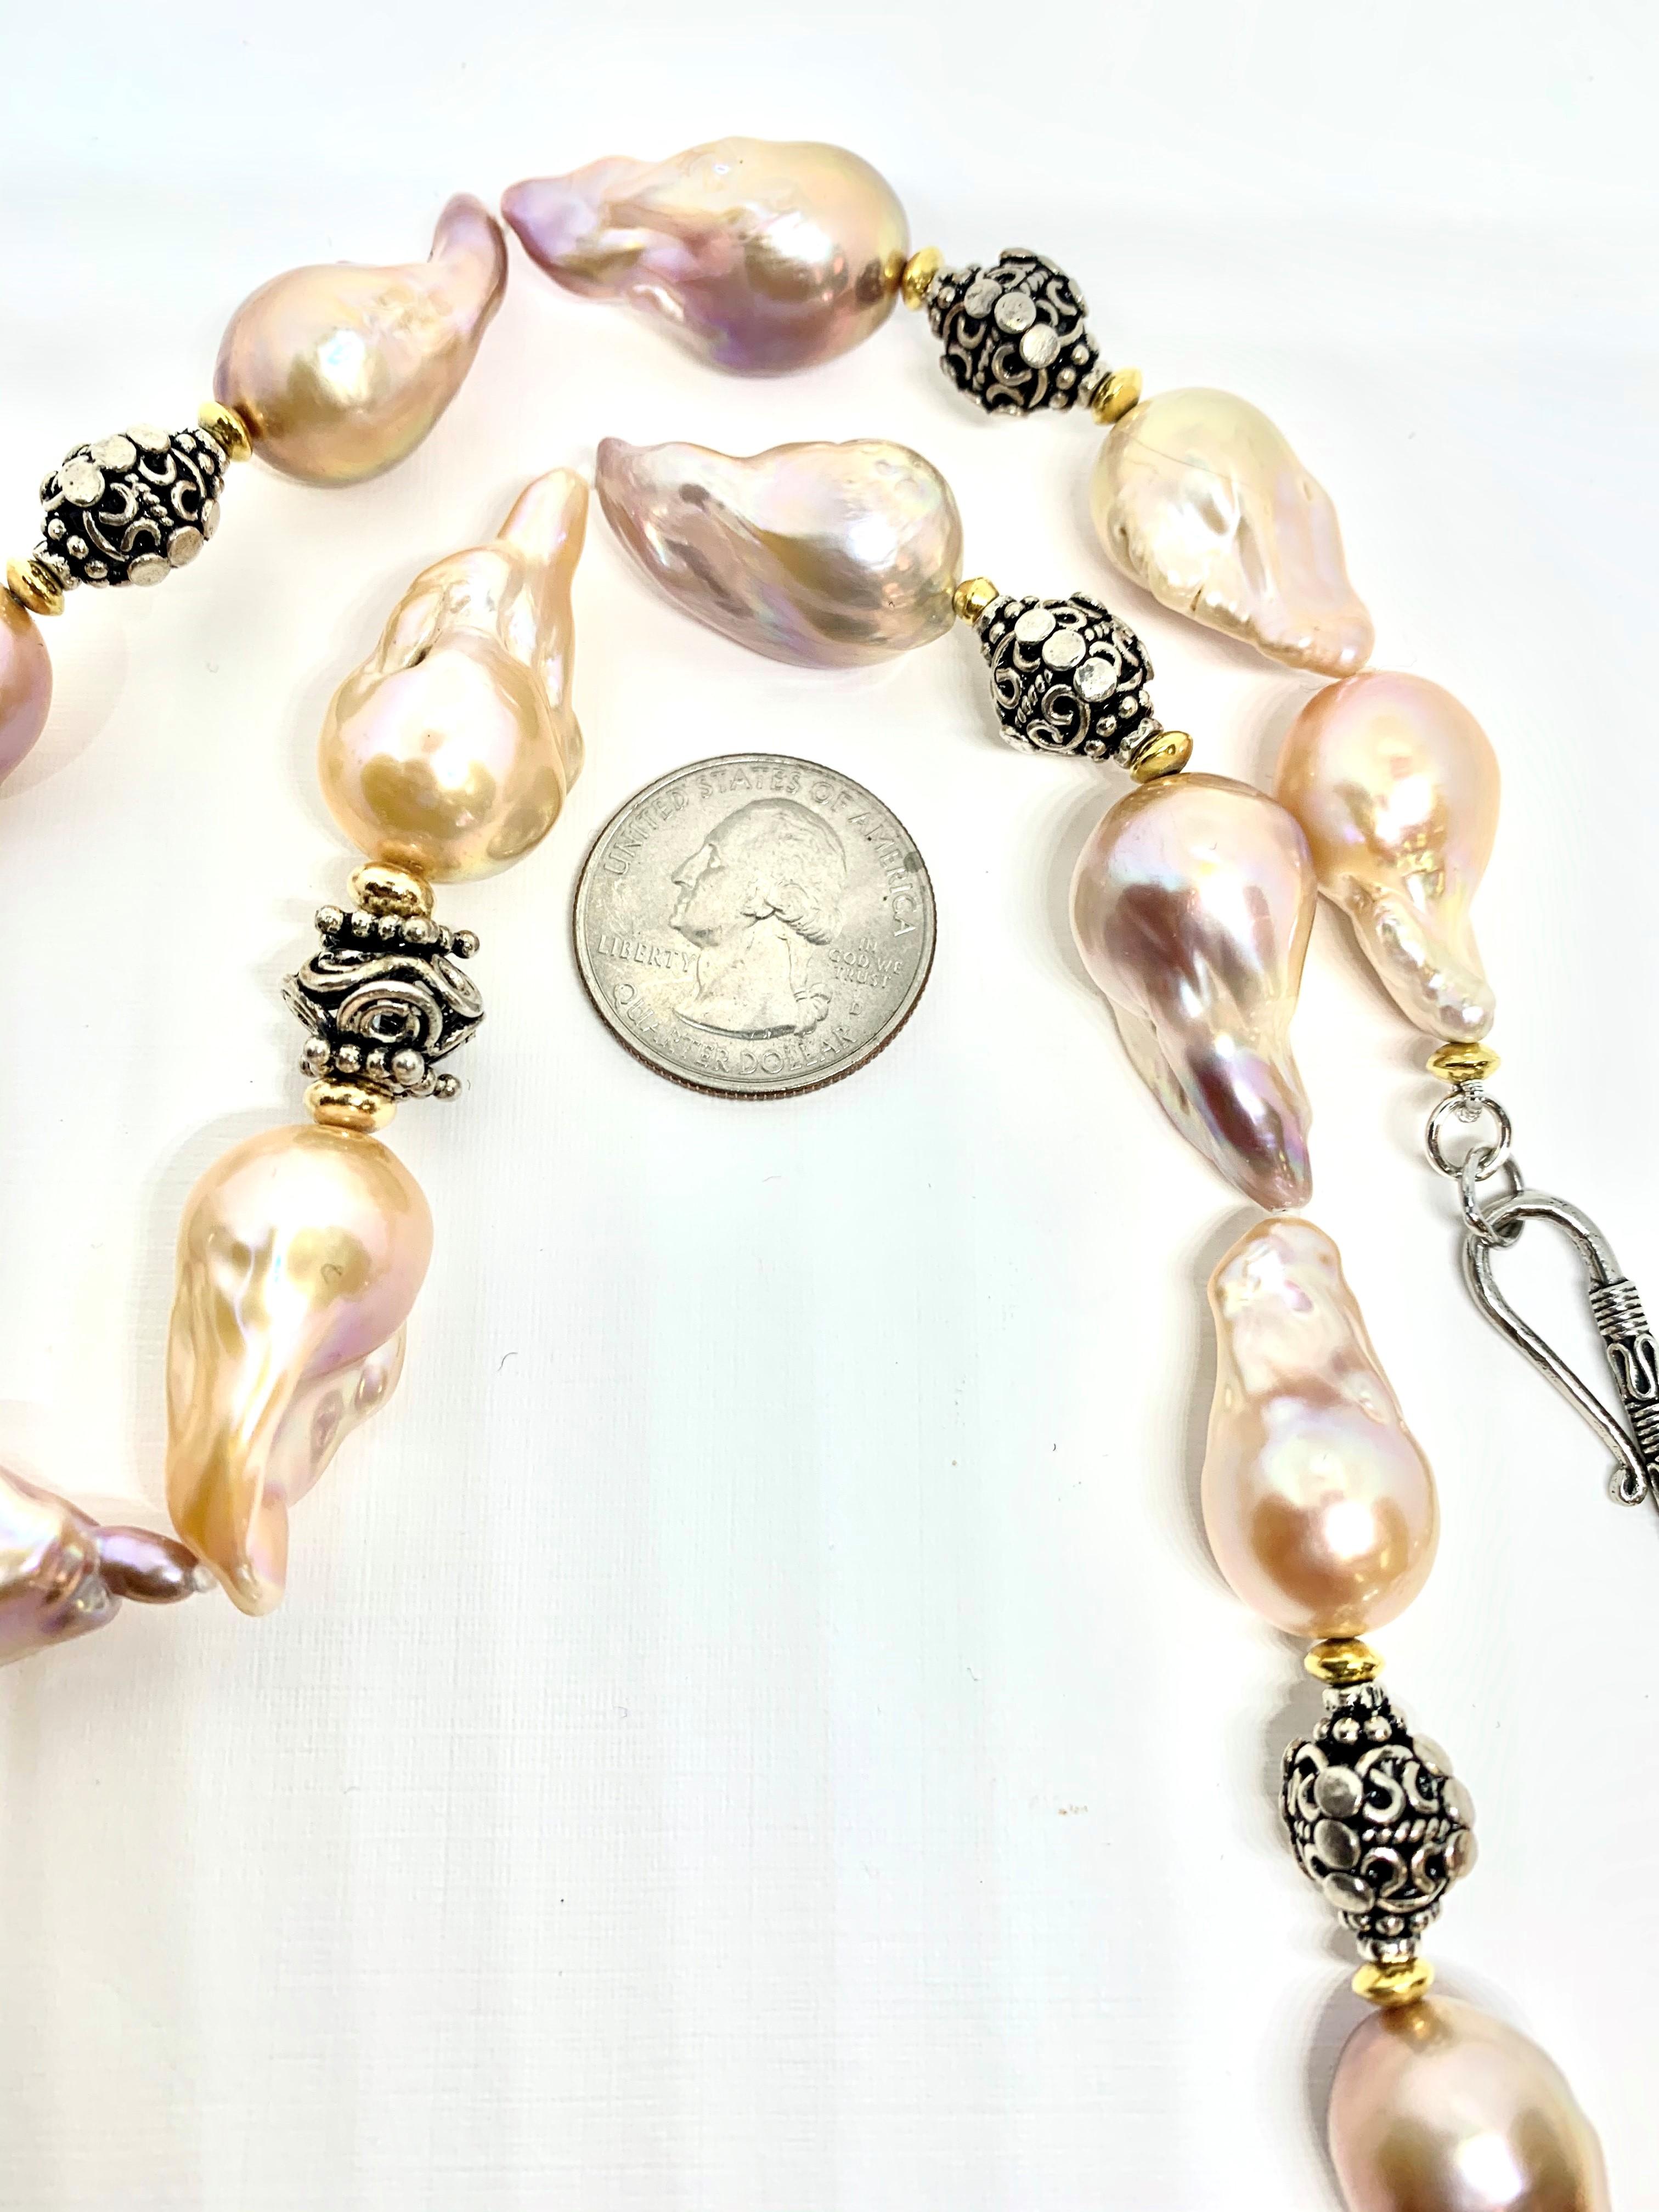 Bead Baroque Pearl Necklace with Silver, 18k and 22k Yellow Gold Accents and Clasp